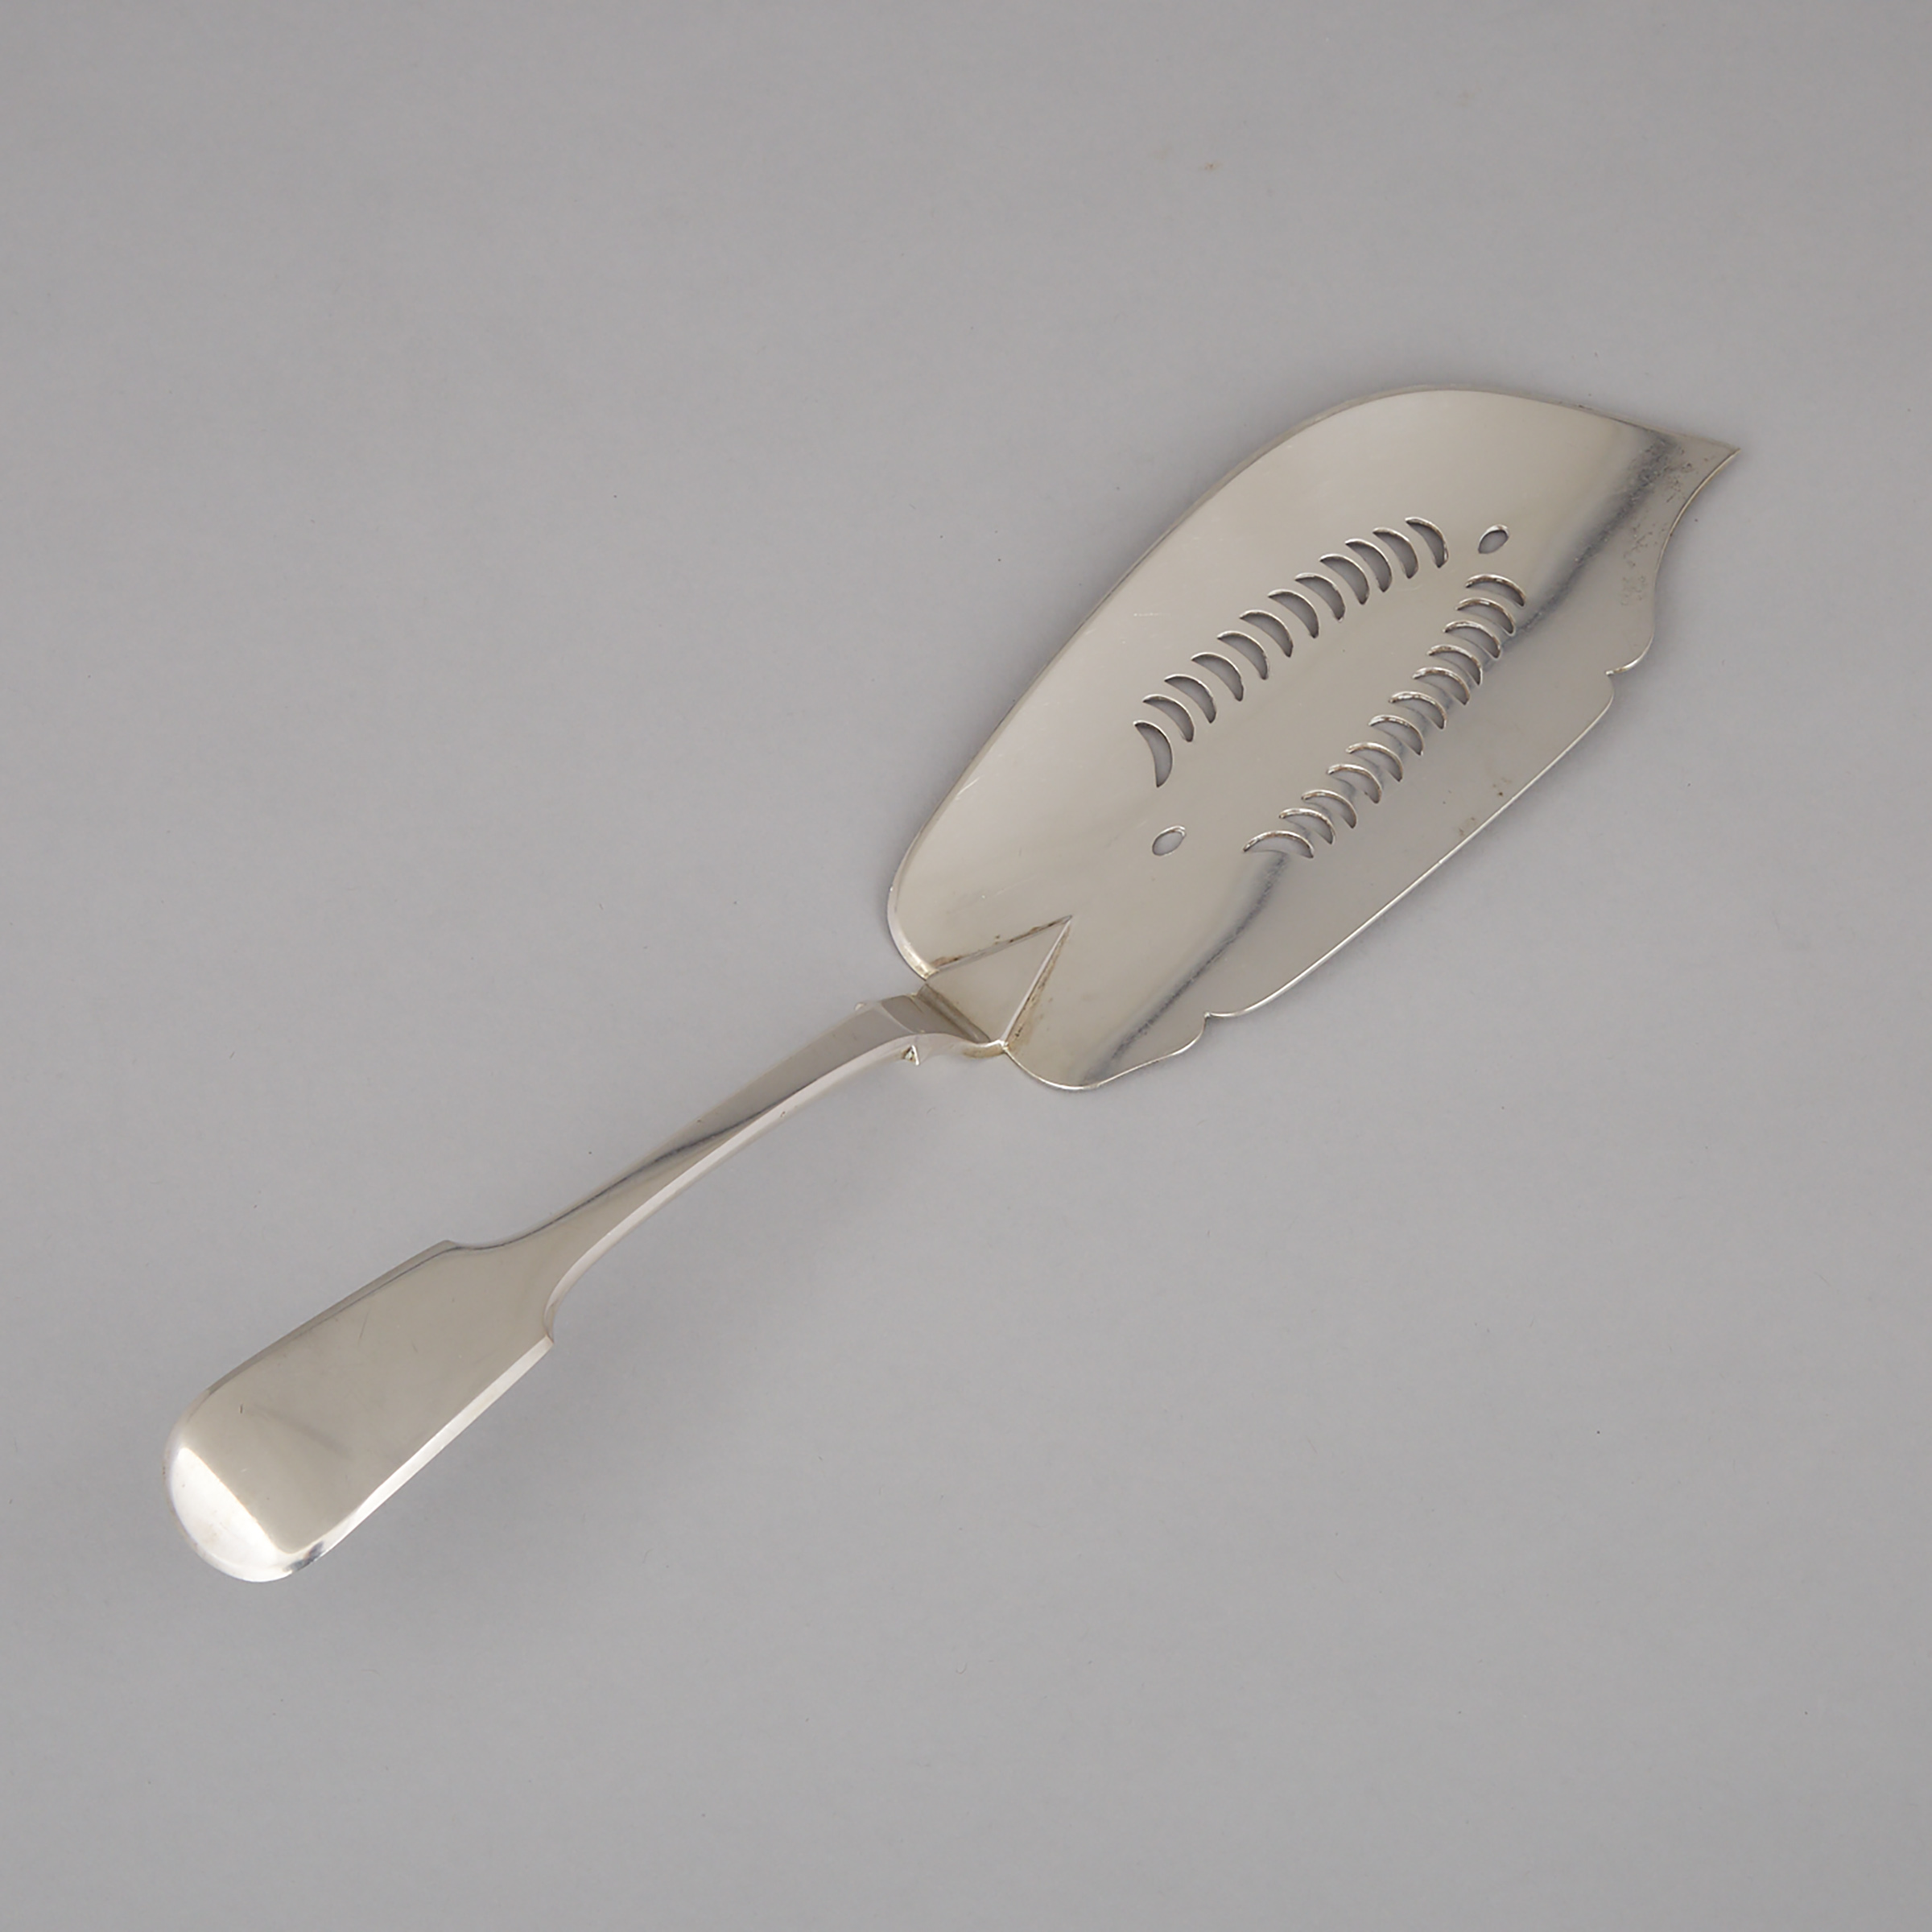 Canadian Silver Fiddle Pattern Fish Slice, George Savage, Montreal, Que., mid-19th century